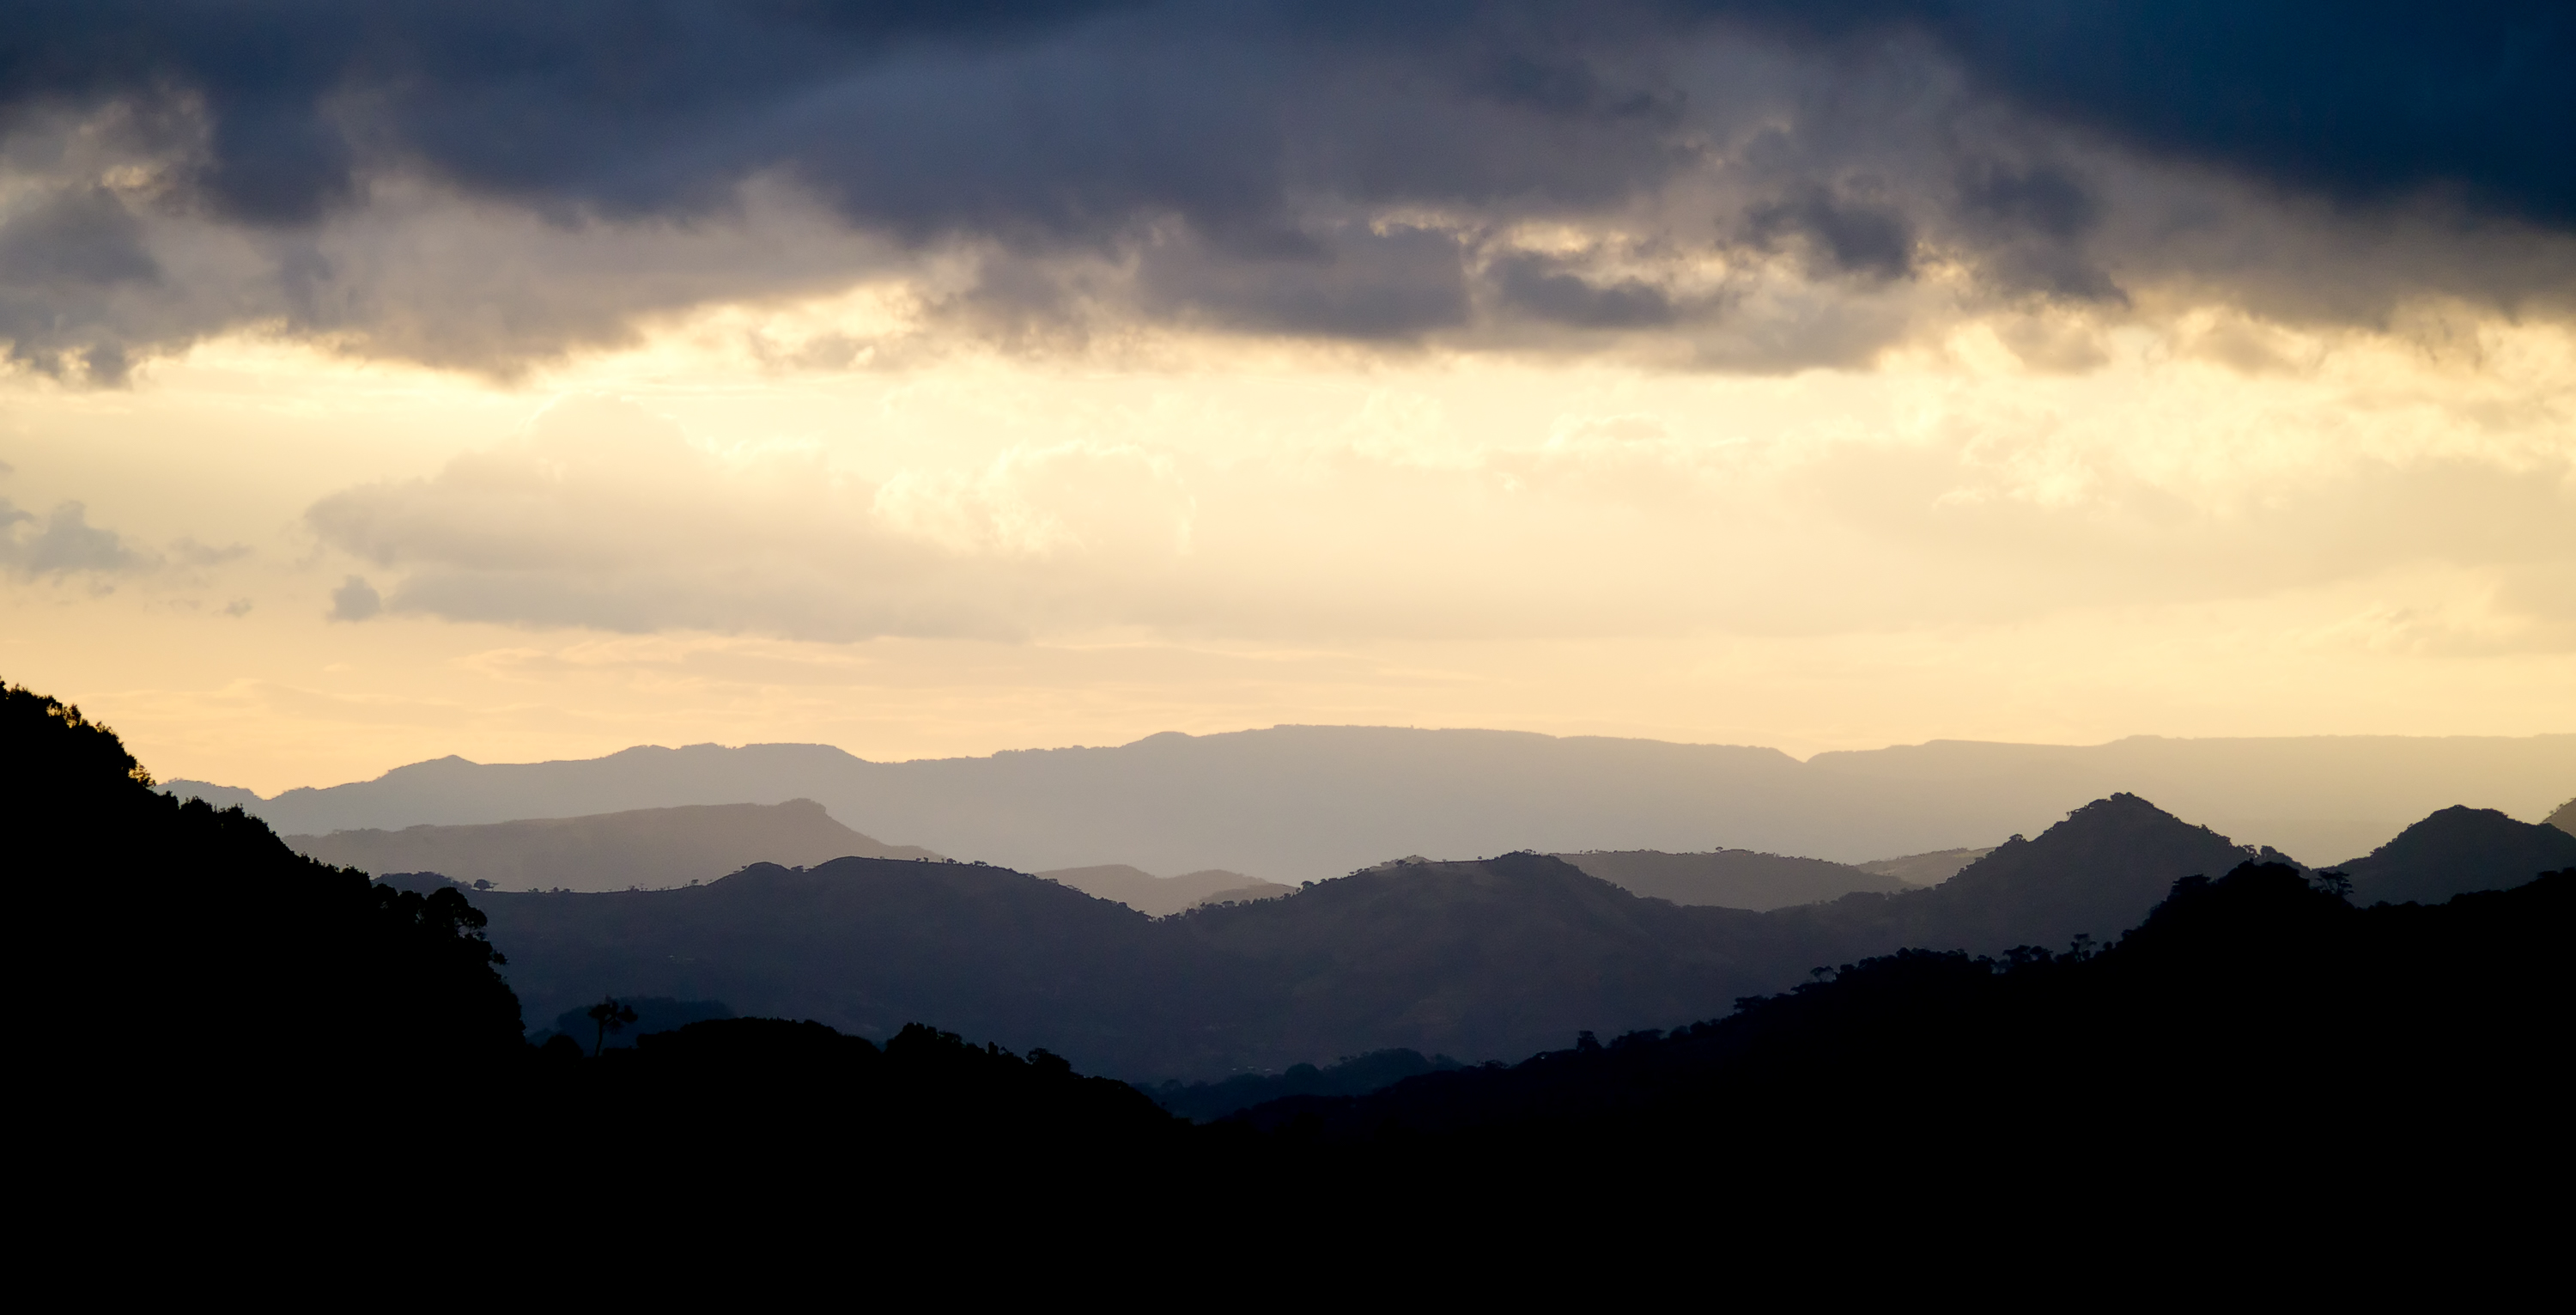 Mountains at sunset, central Nicaragua (2012)